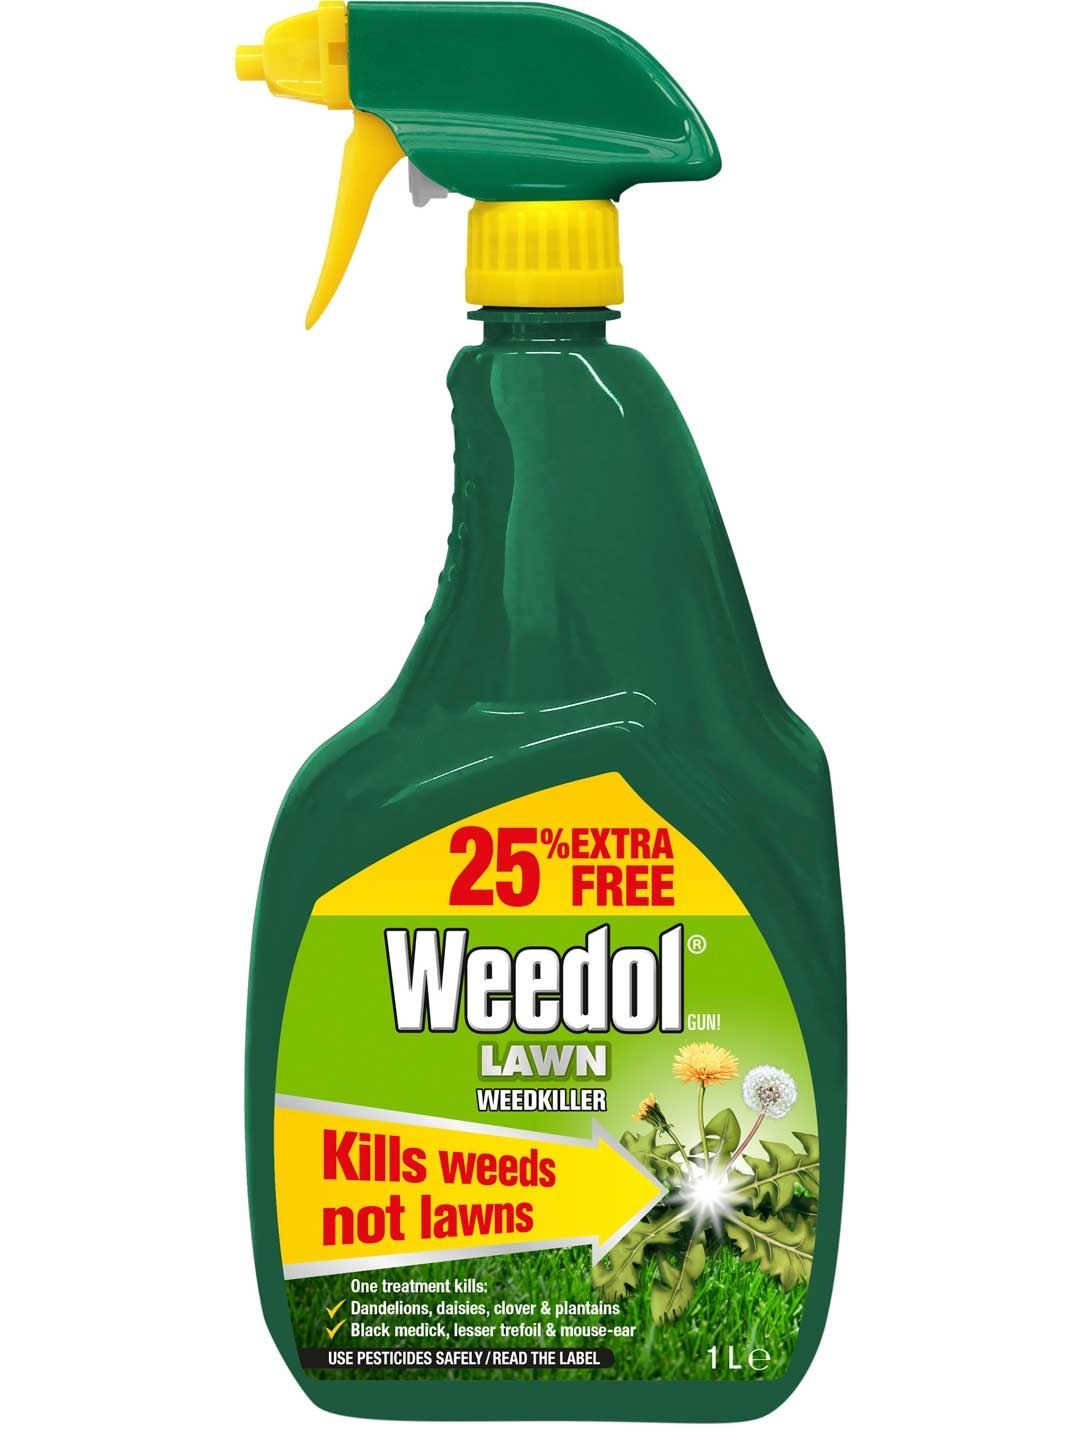 Scotts Weedol Lawn Weed Killer in Ready to Use Spray Bottle